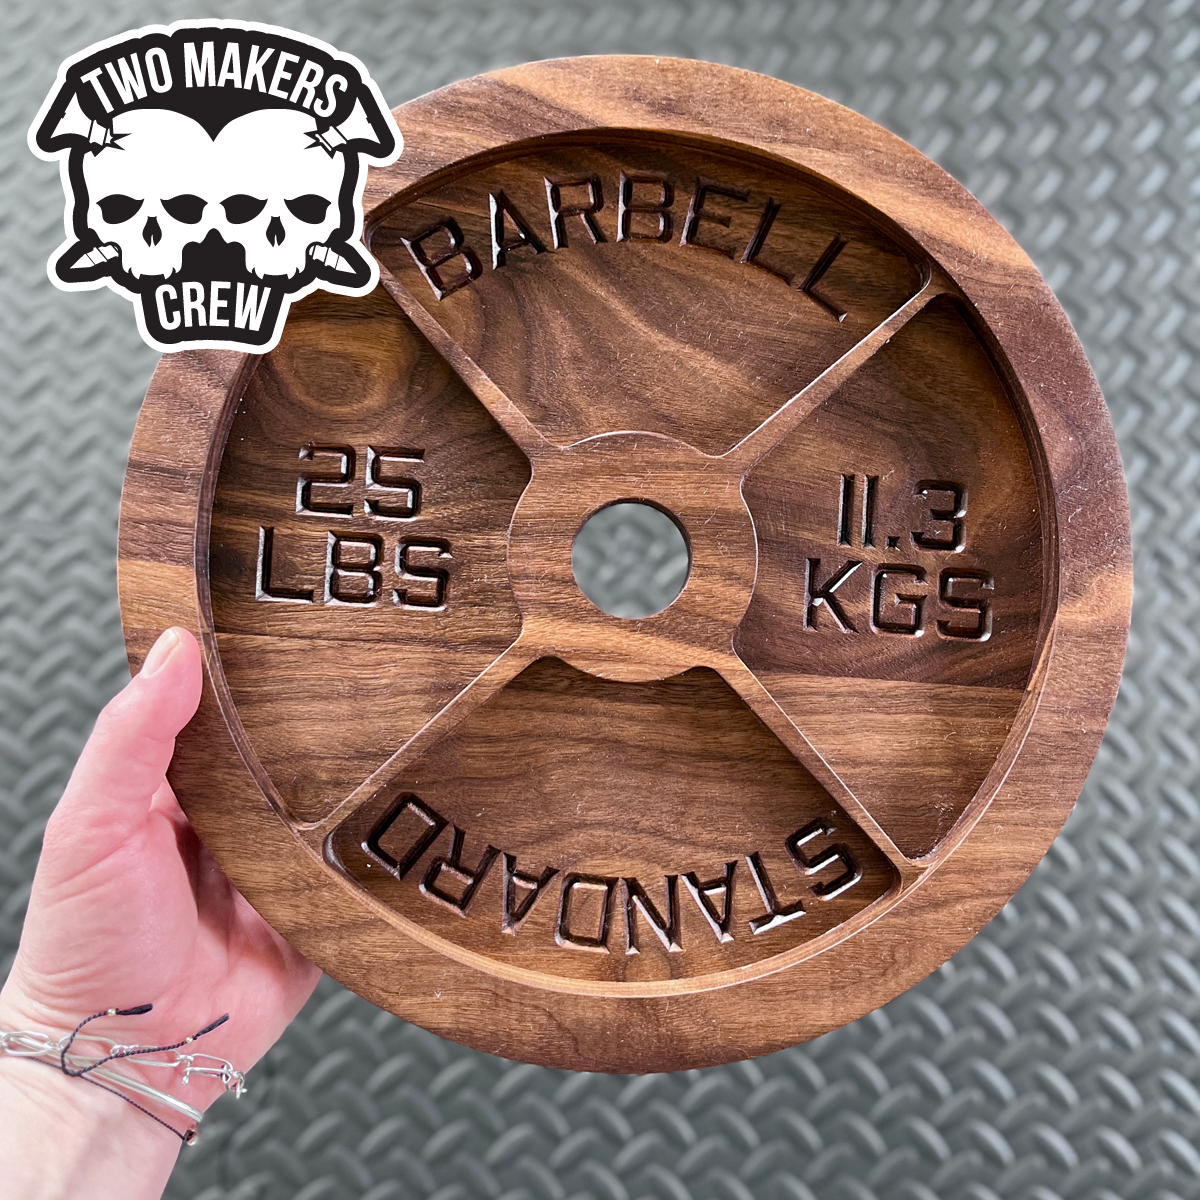 Dark walnut 25 lbs barbell weight plate tray made by Two Makers Crew. Perfect gift for athlete boyfriend